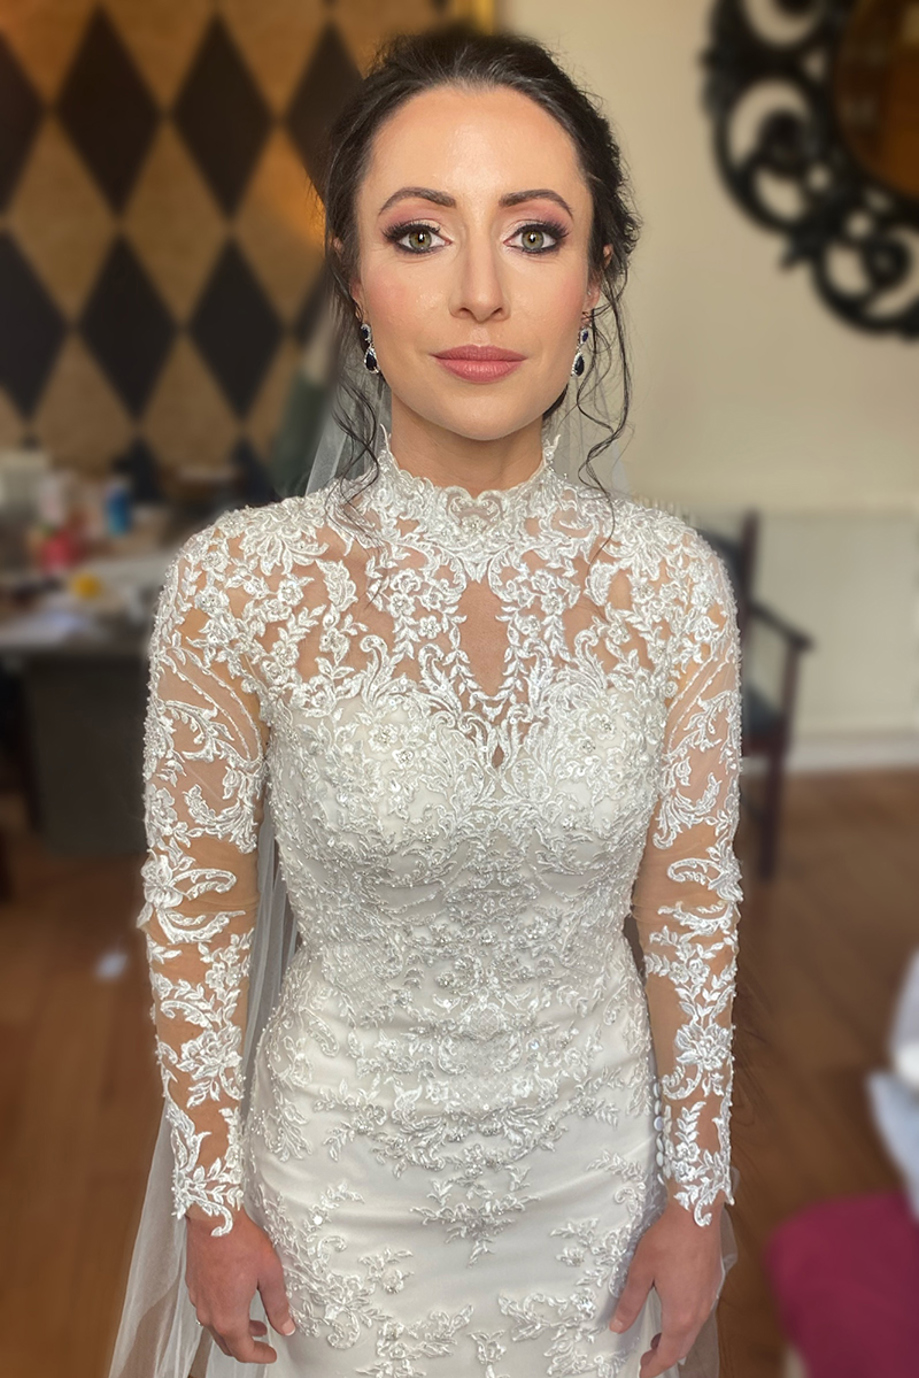 Bride in long-sleeved lace dress and veil with a wash of pink on her eyelids